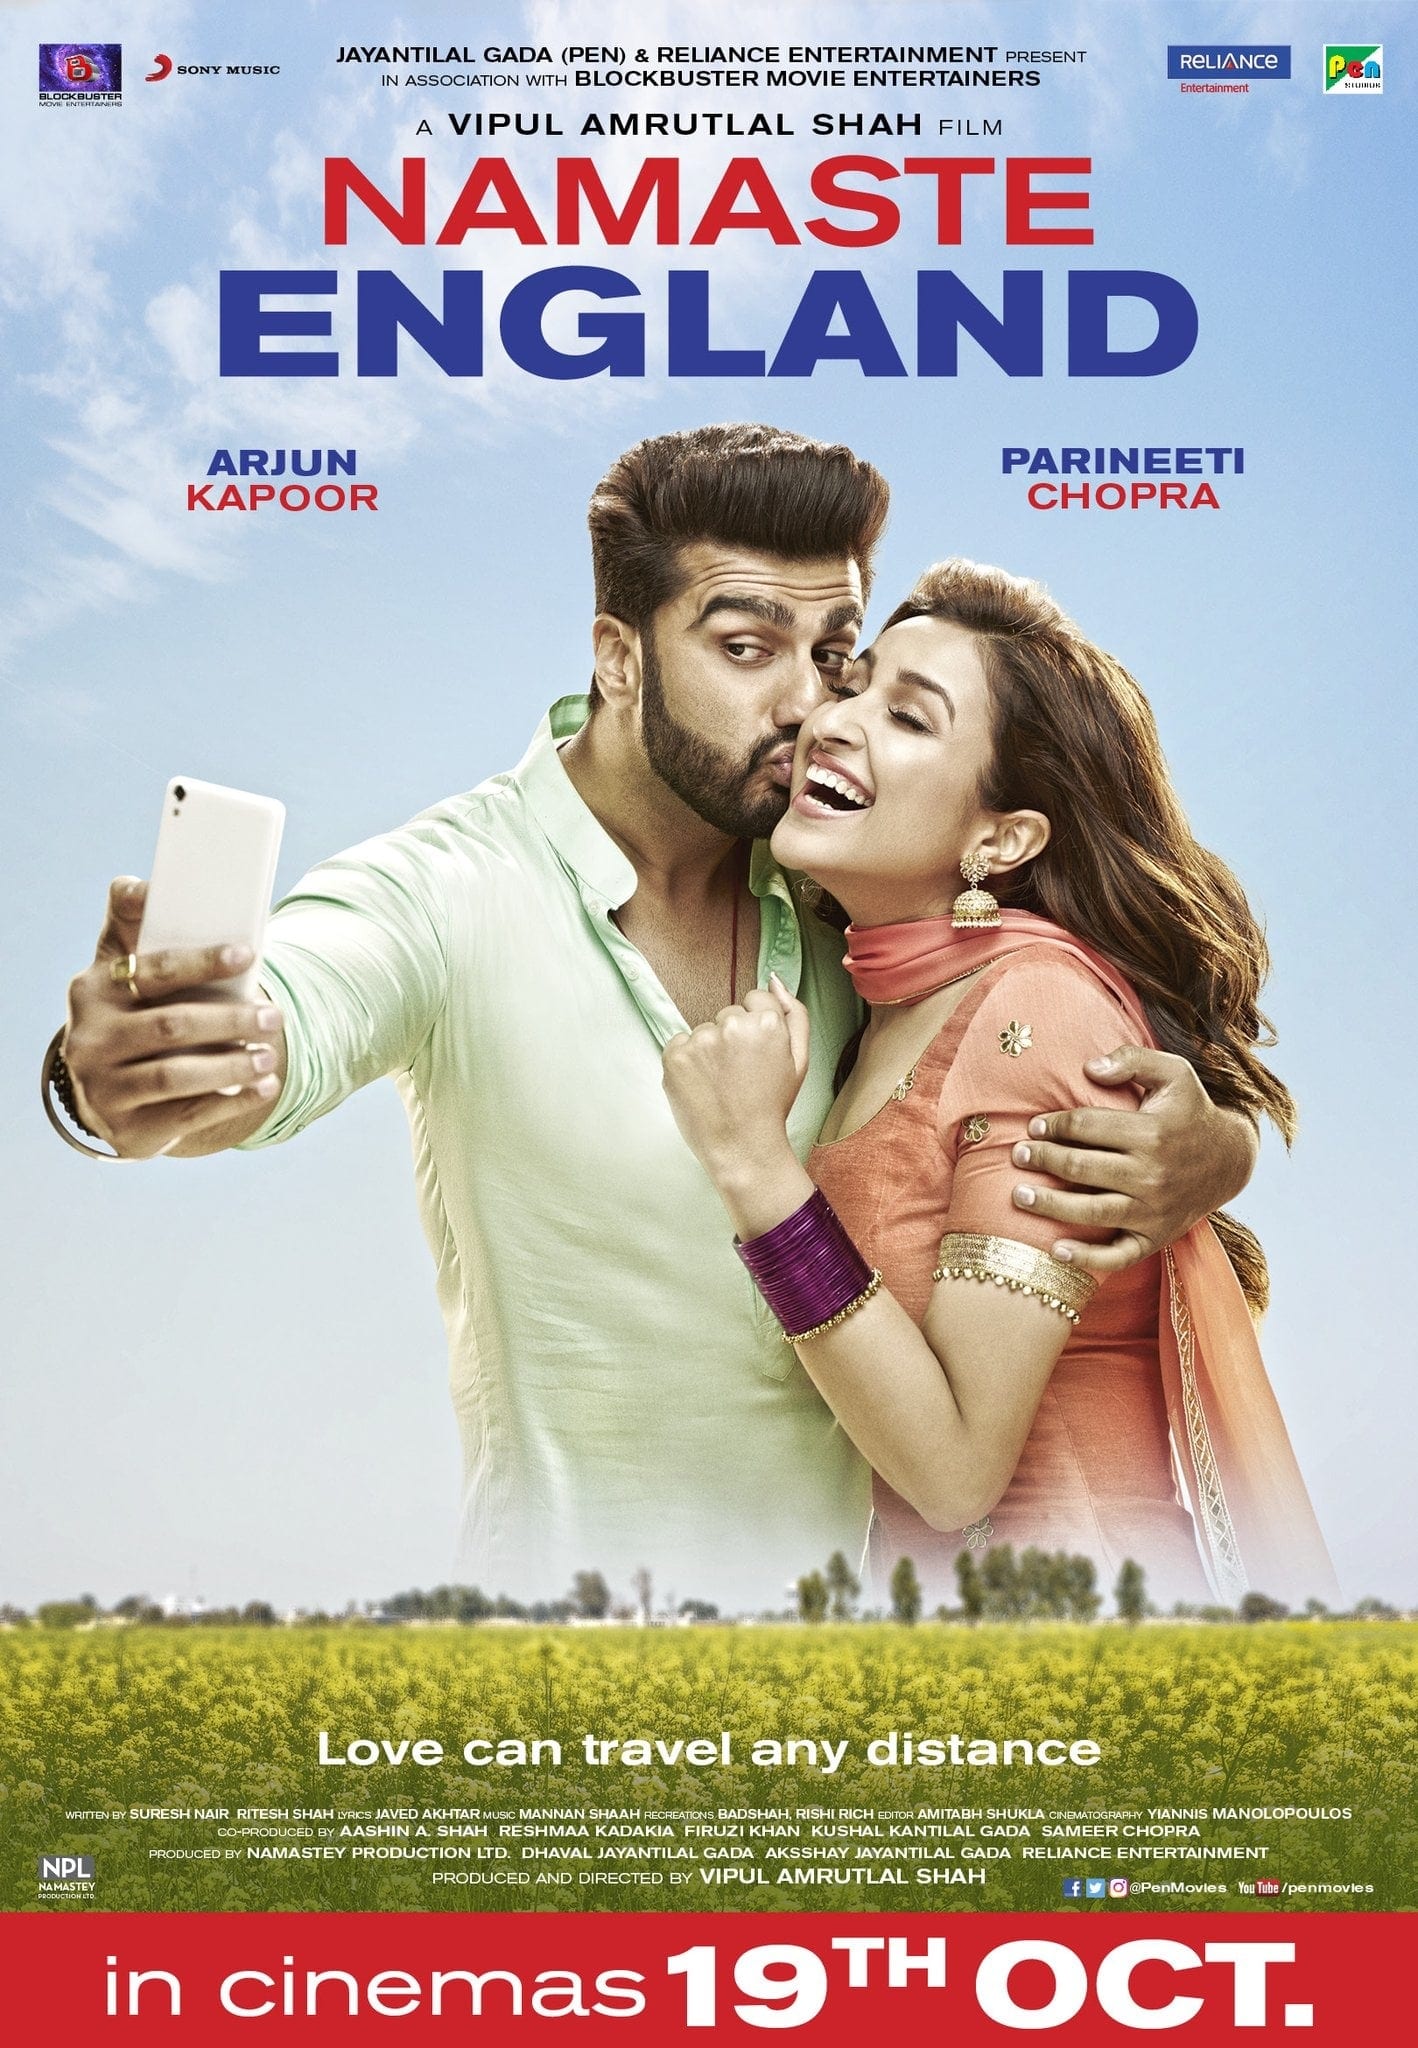 Poster for the movie "Namaste England"